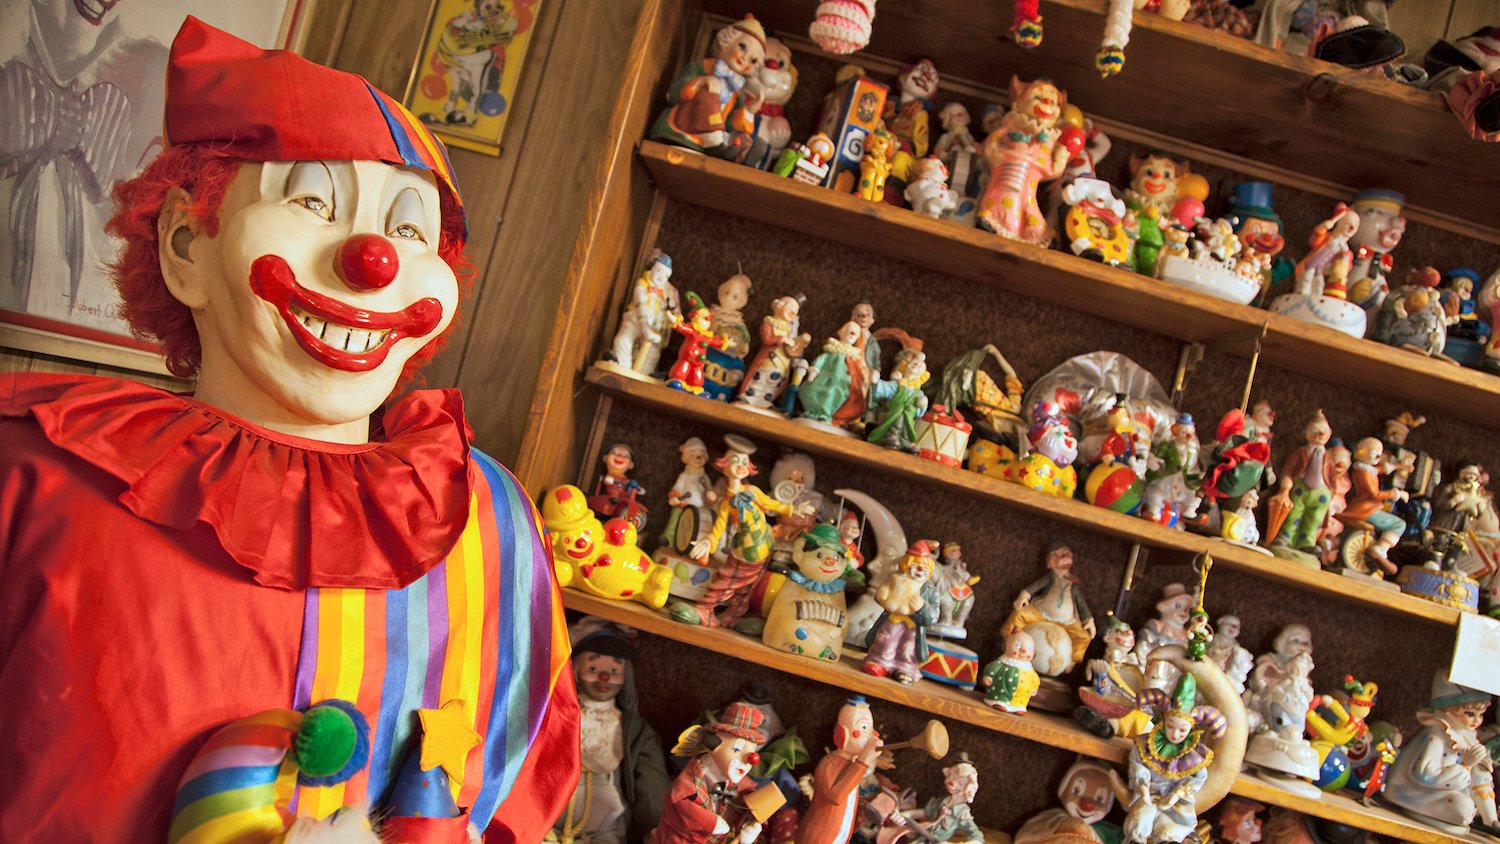 Interior of the clown motel in Tonopah, Nevada featuring clown collectible figurines on a shelf